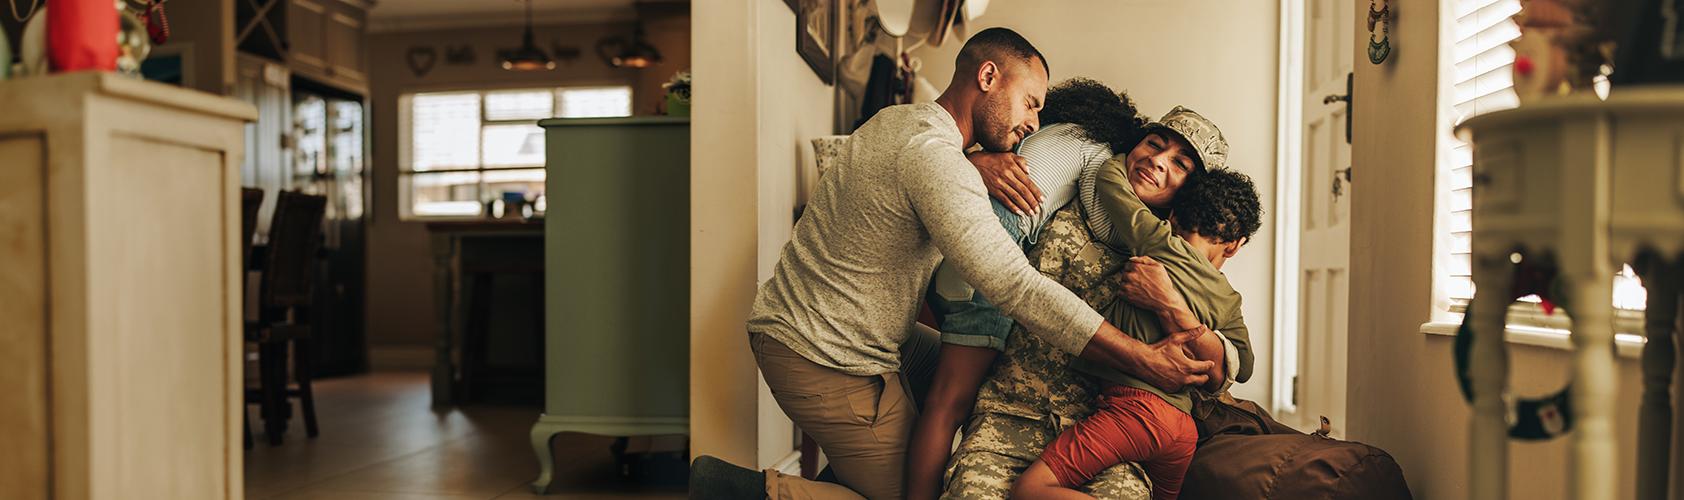 Military family hugging each other at the door